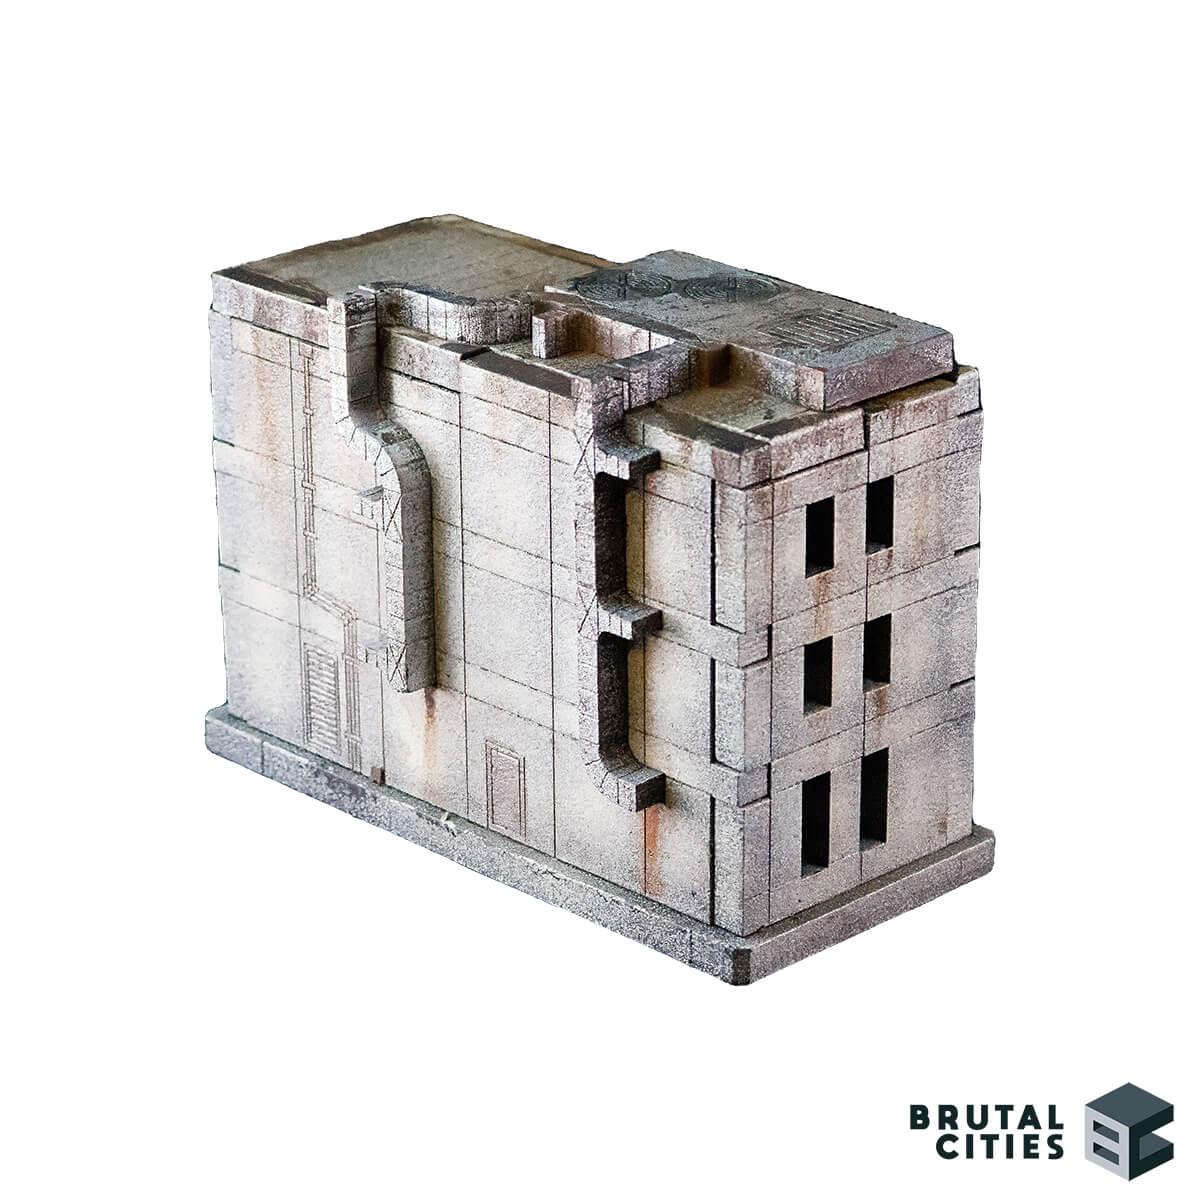 6mm Sci-fi Terrain office building - gray with ducting and air condensor